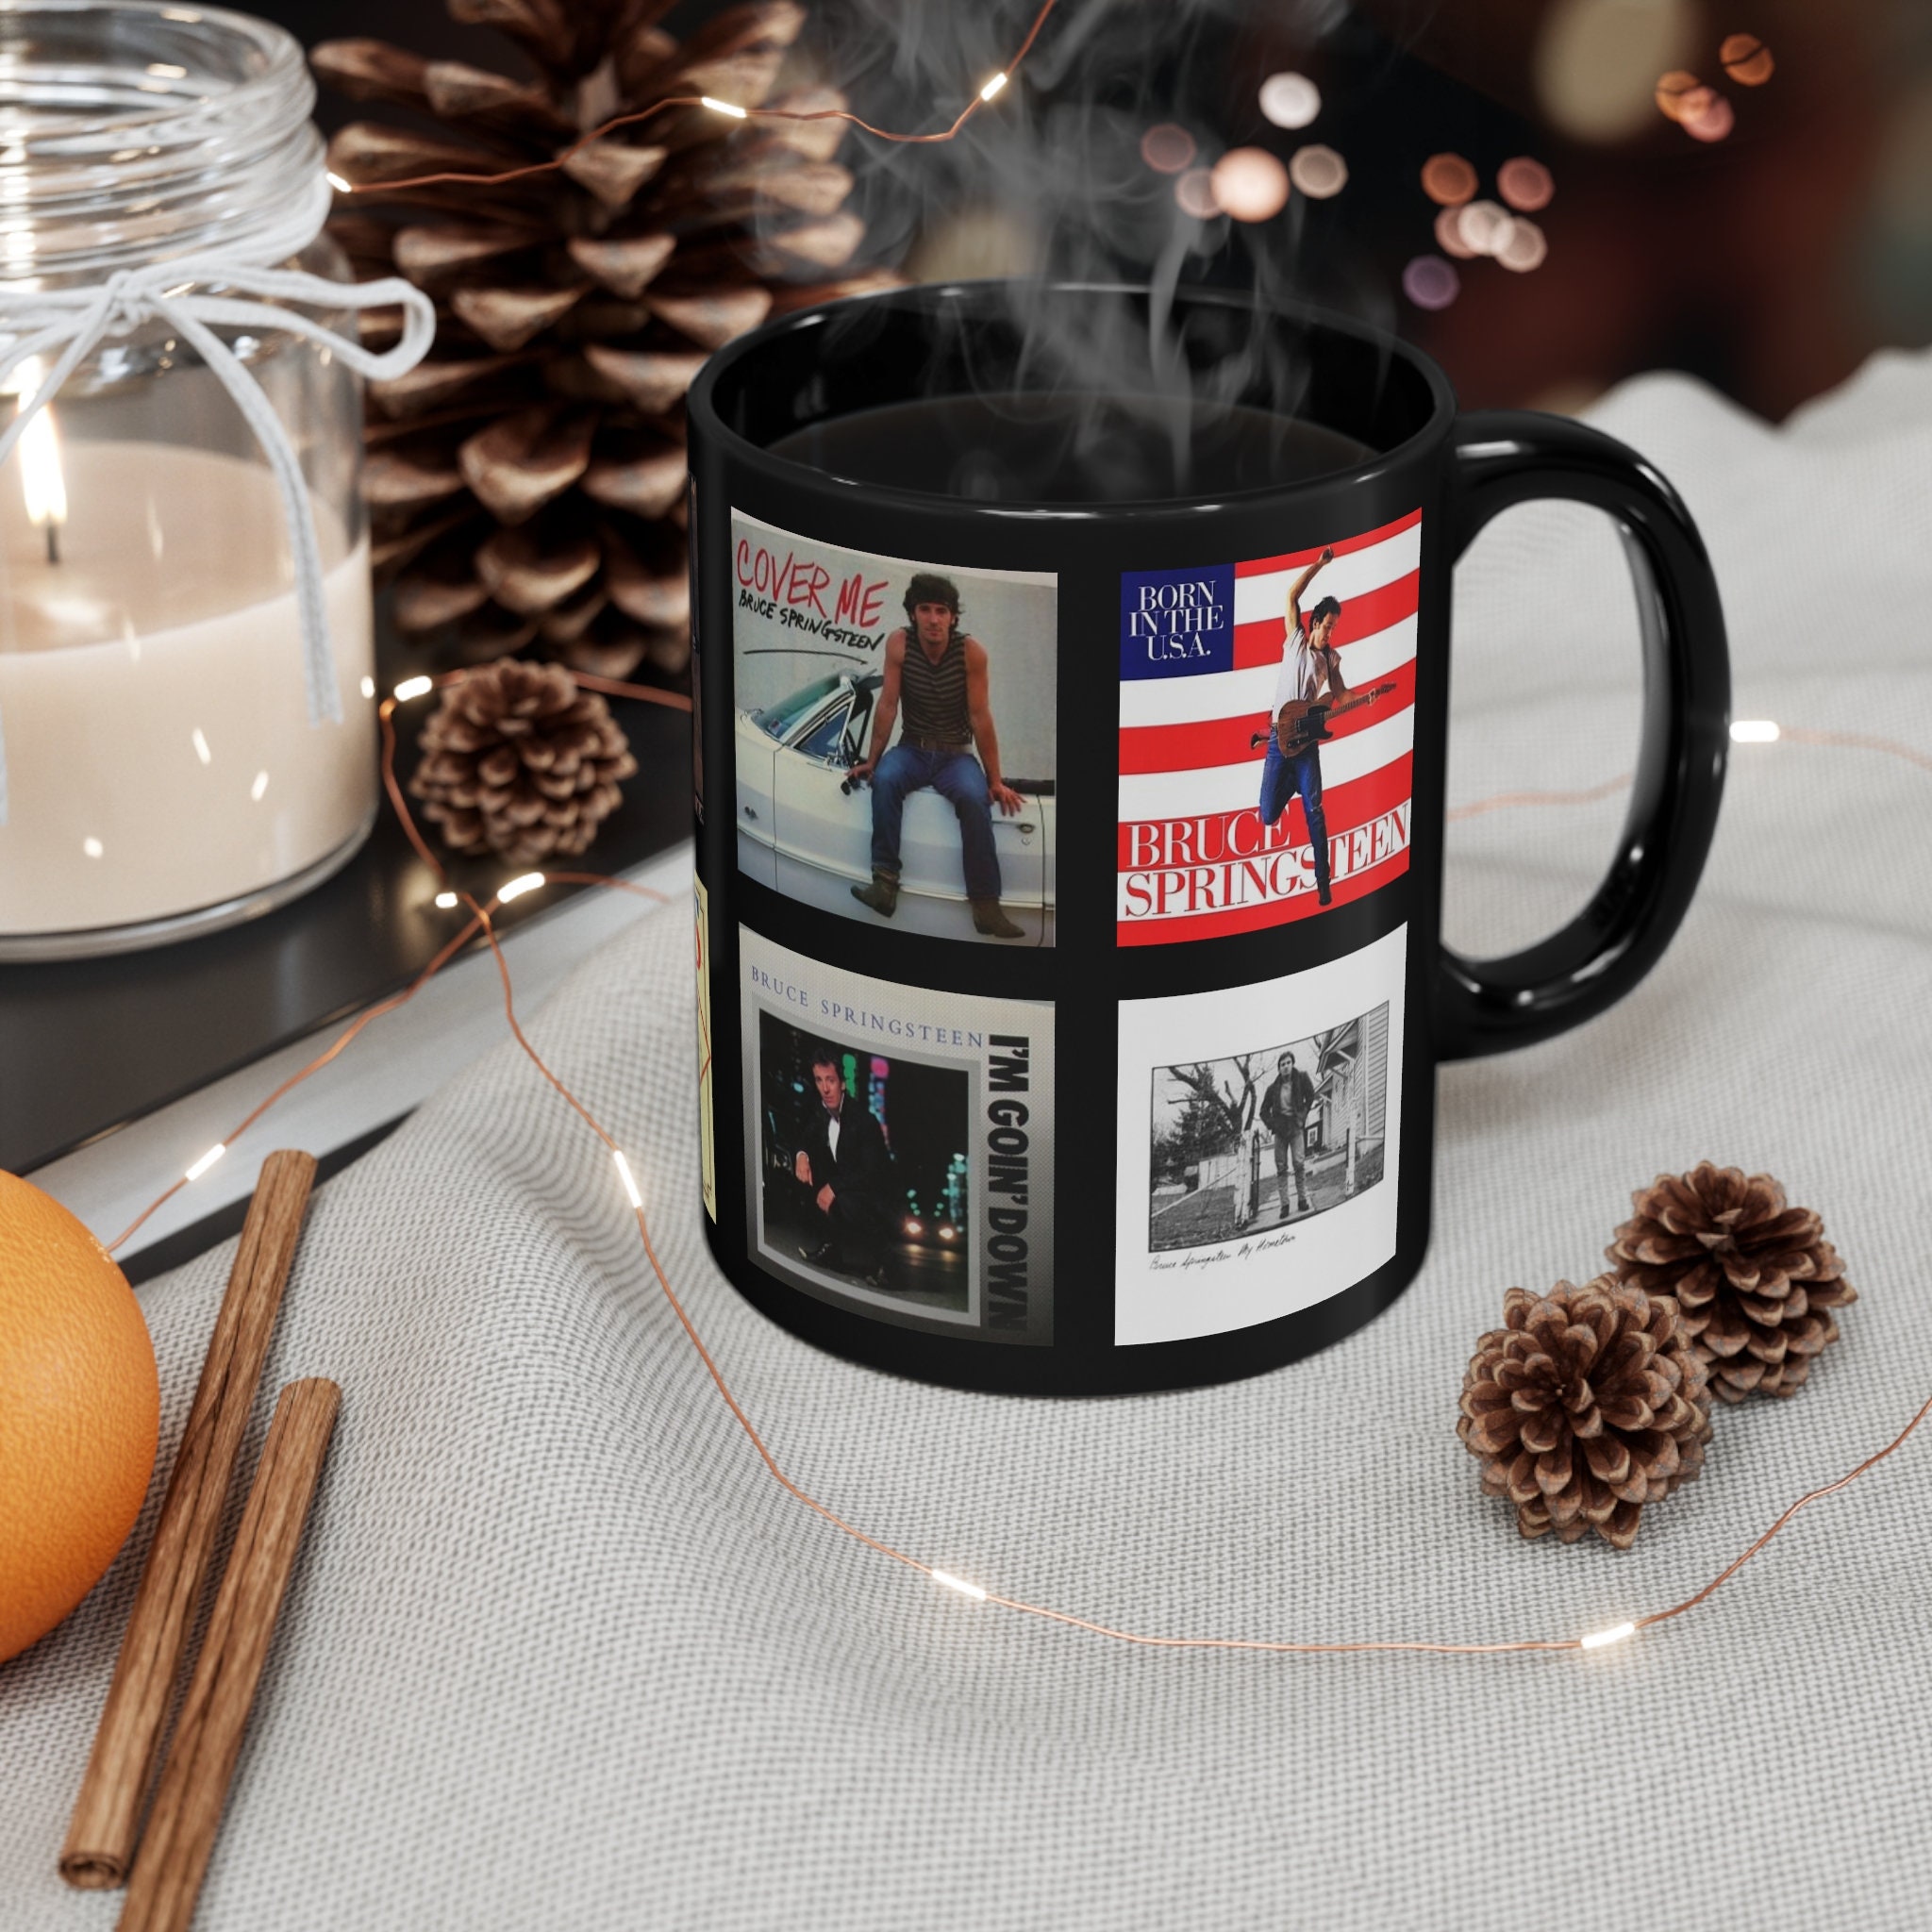 Bruce Springsteen Born in the USA mug, with images of the album and singles covers